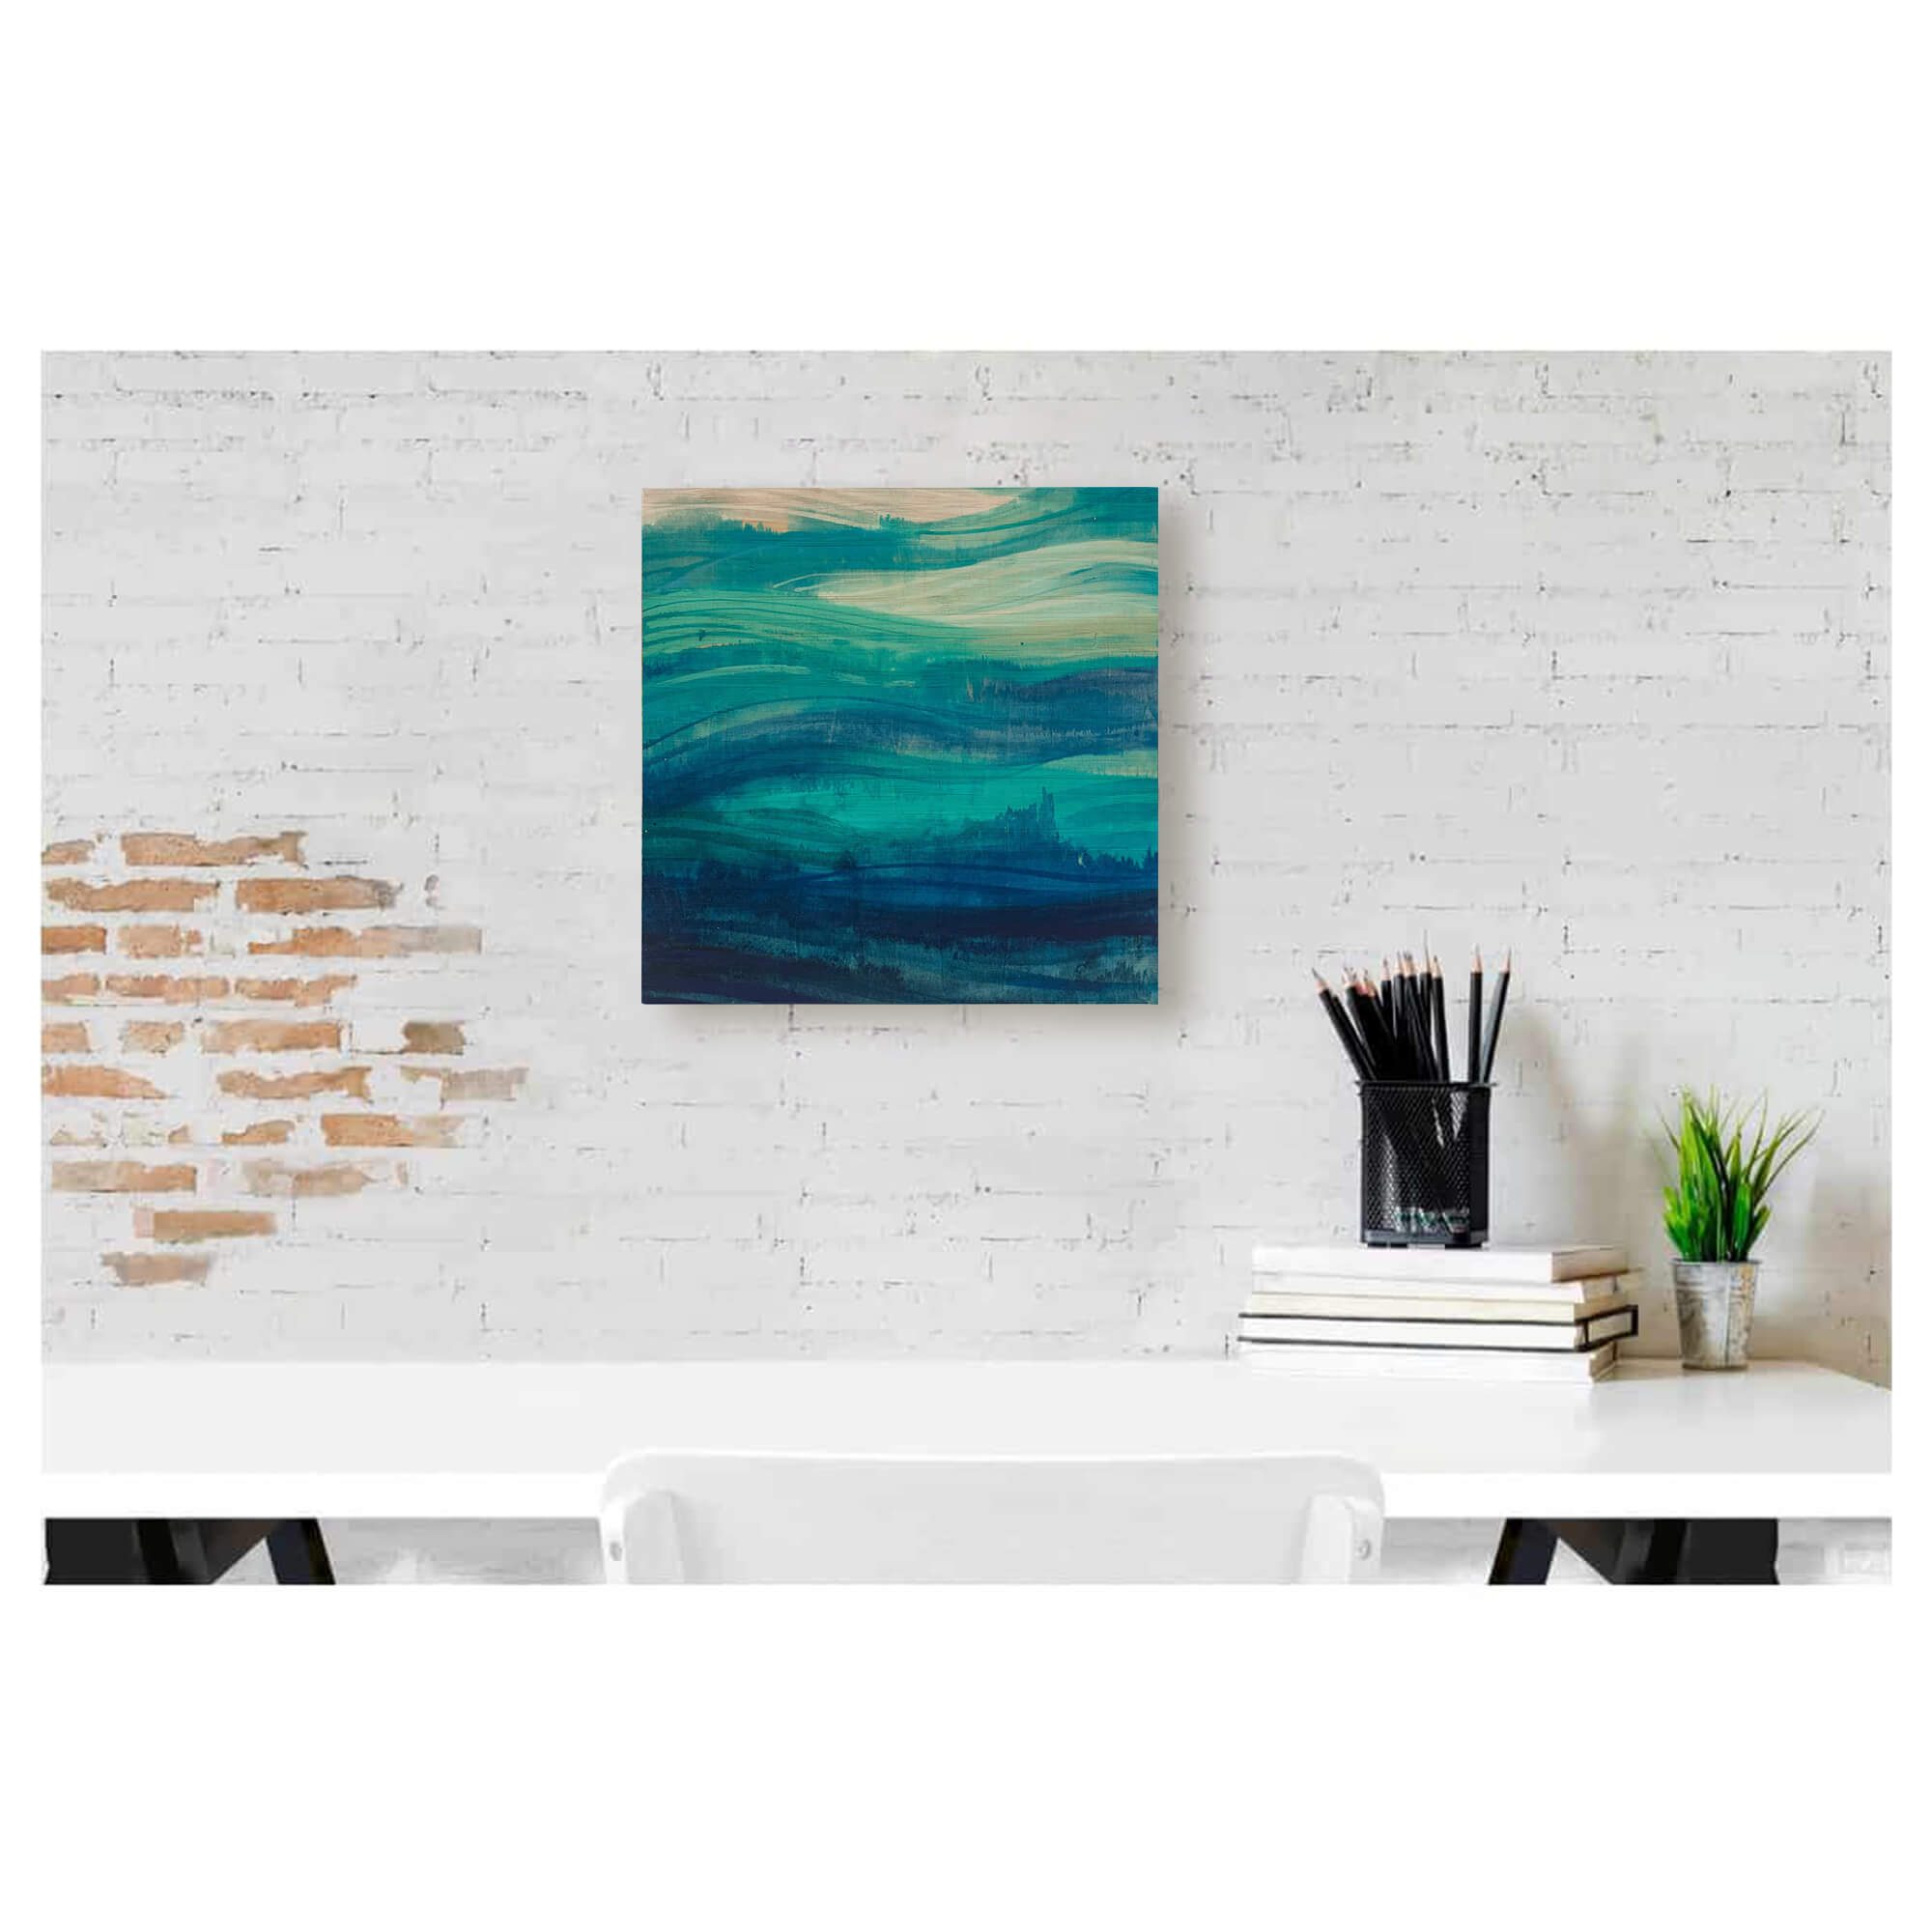 A bamboo art print of the differing blue and aqua hues of the ocean by Hawaii artist Lauren Roth